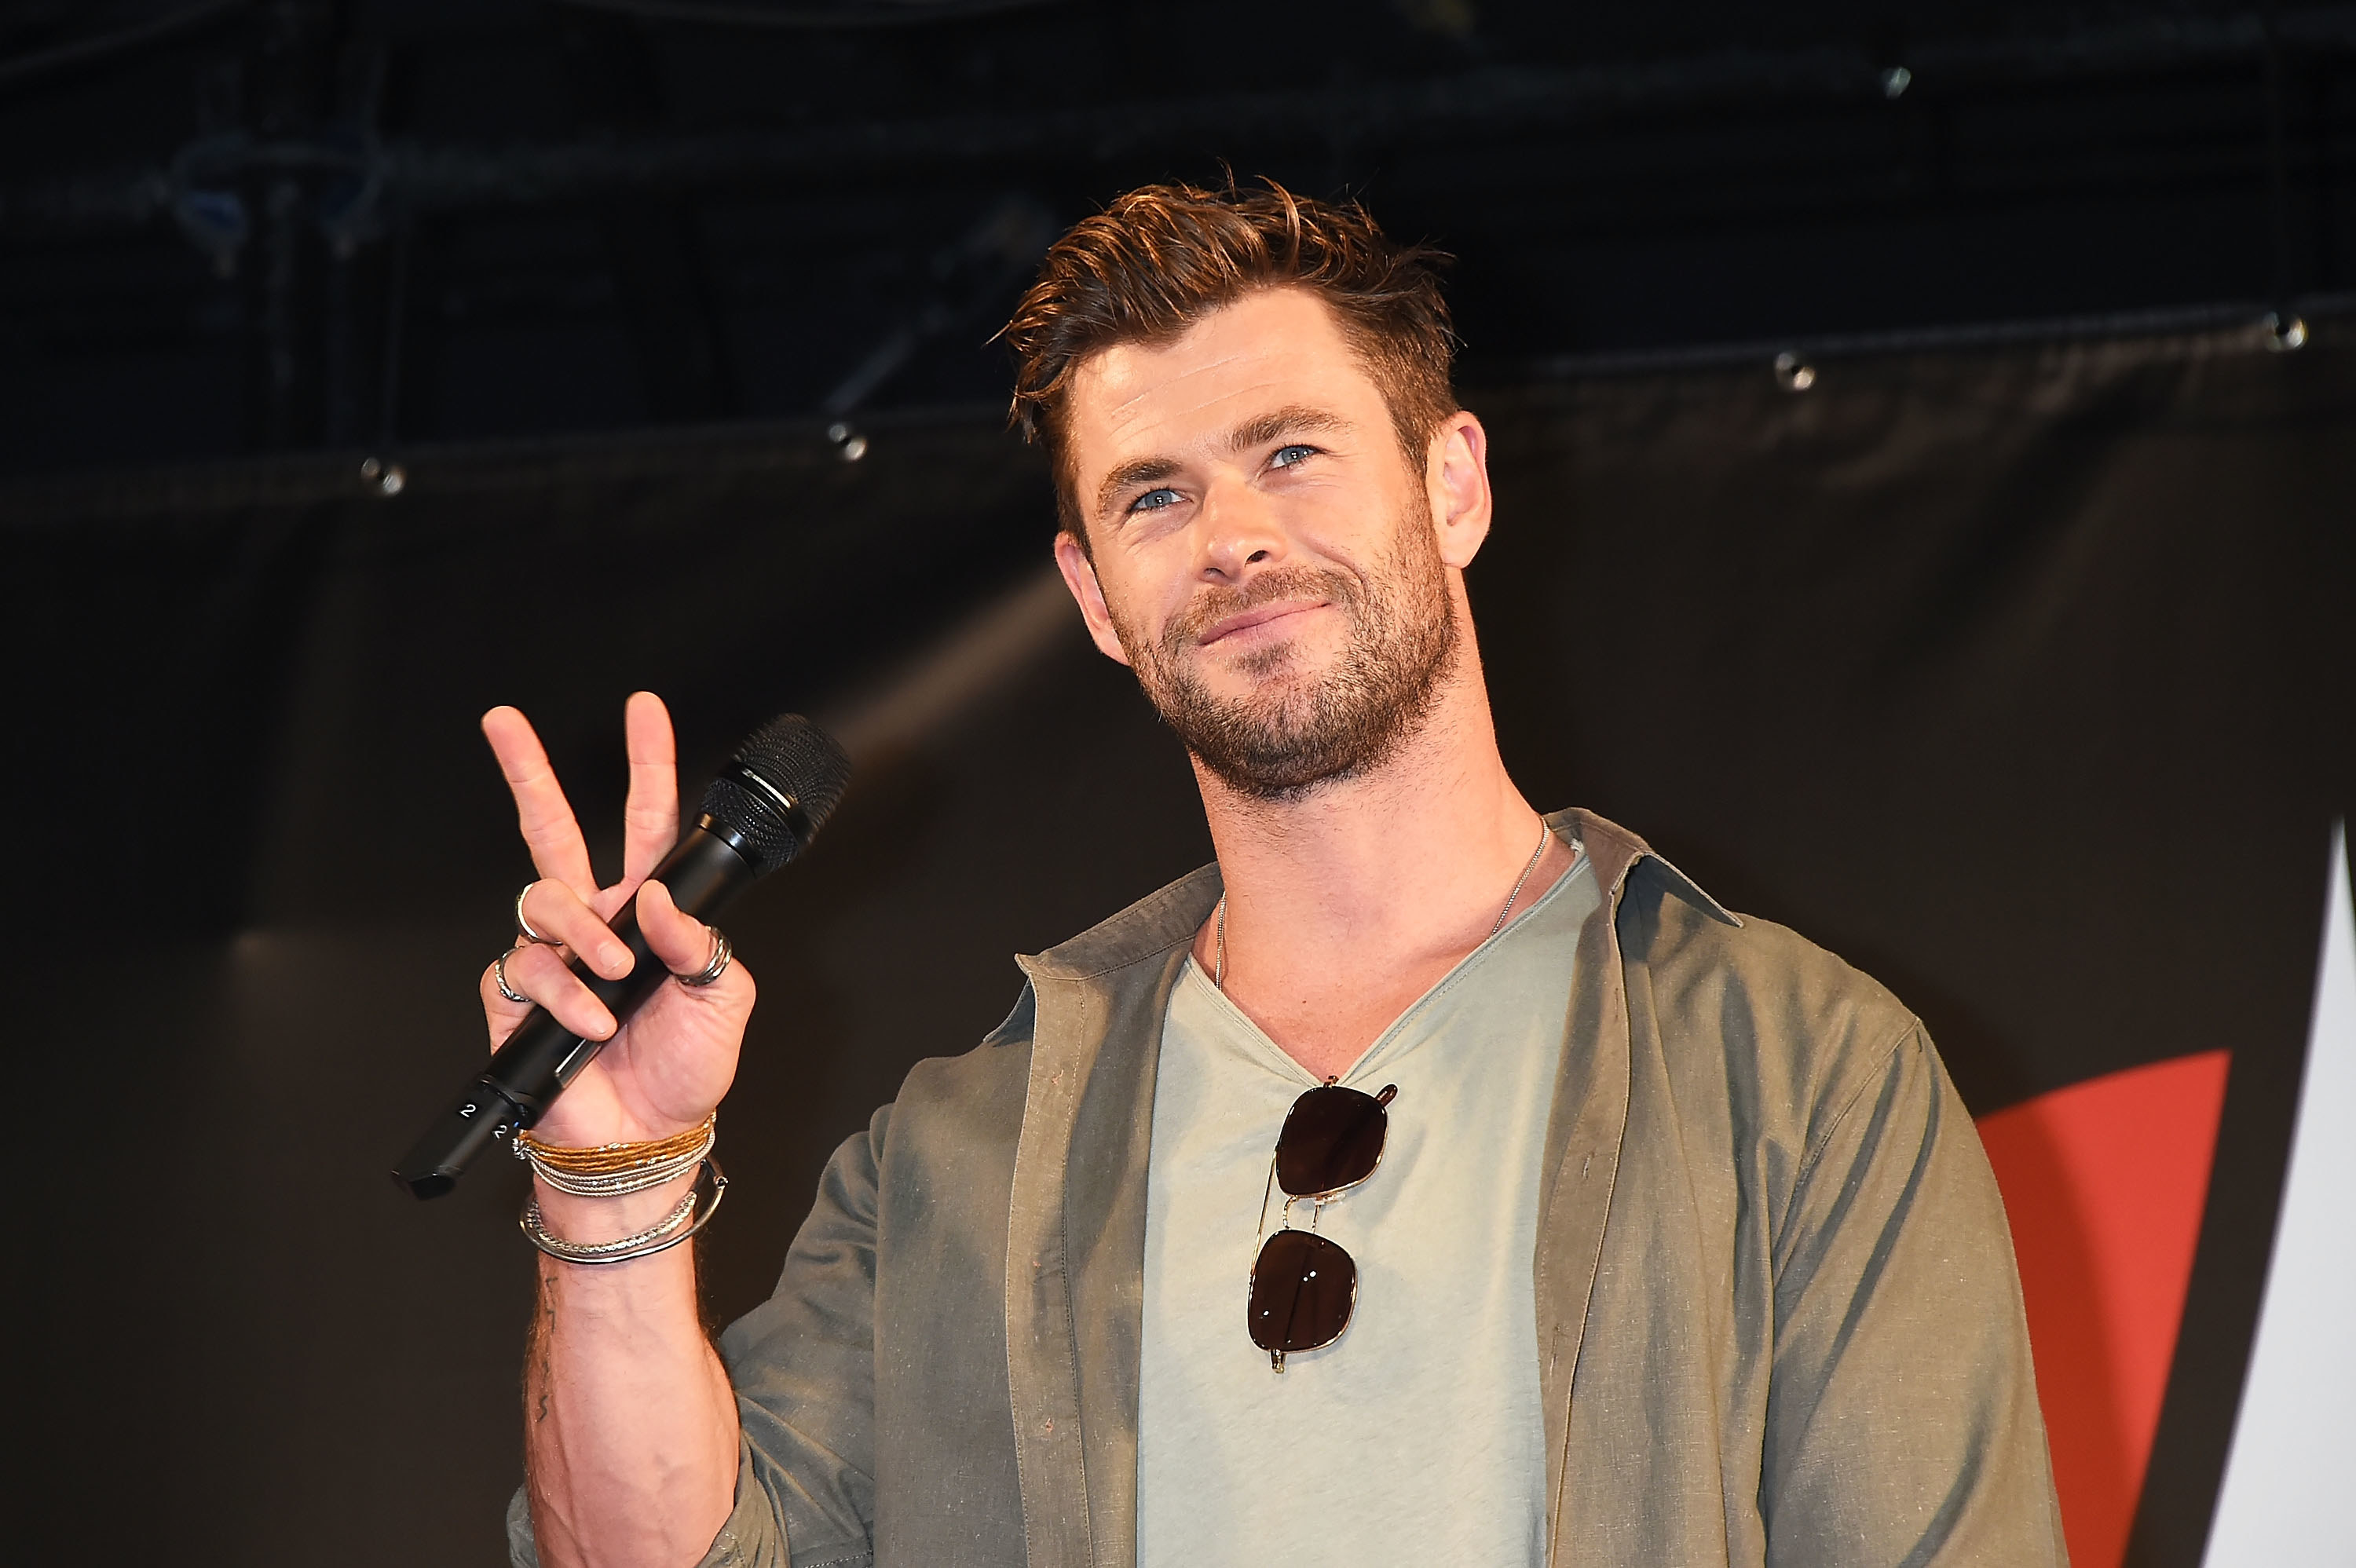 Chris Hemsworth throwing the peace sign